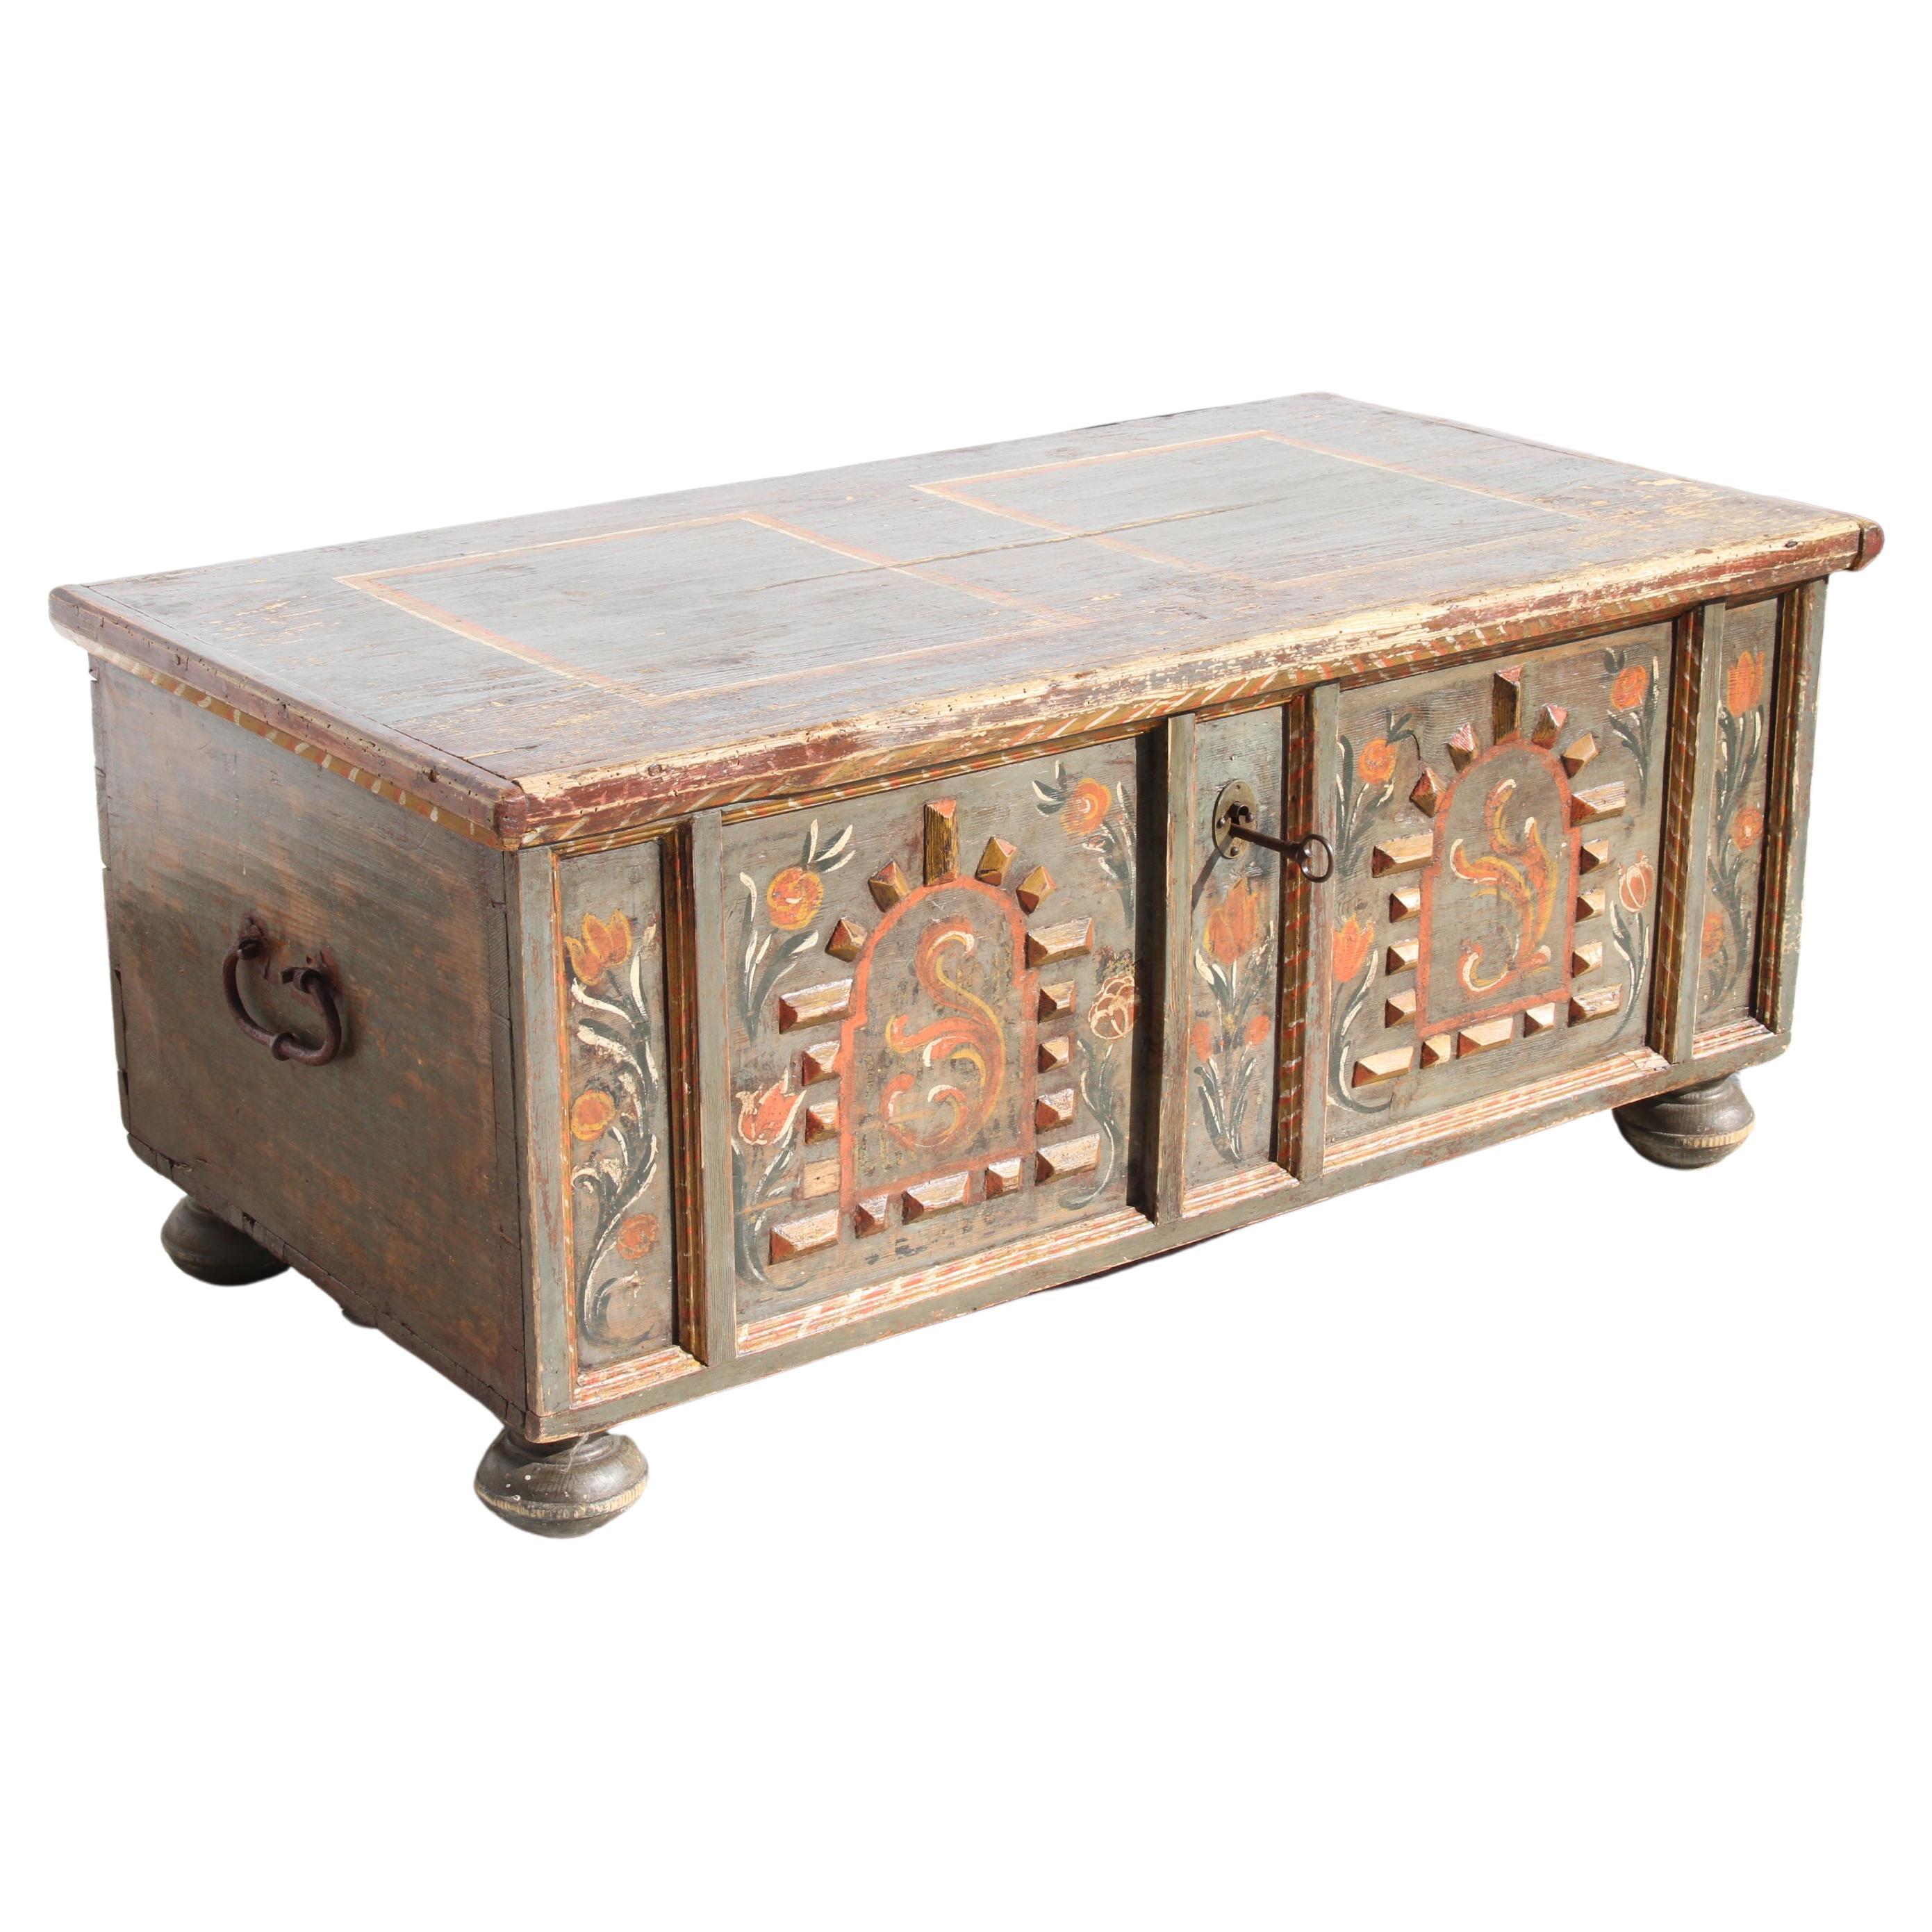 Primitive hand carved Bridal chest


European primitive trunk with floral details and wood appliques. 
Key opens to a to reveal a deep storage. Bun feet. Keyed lock.